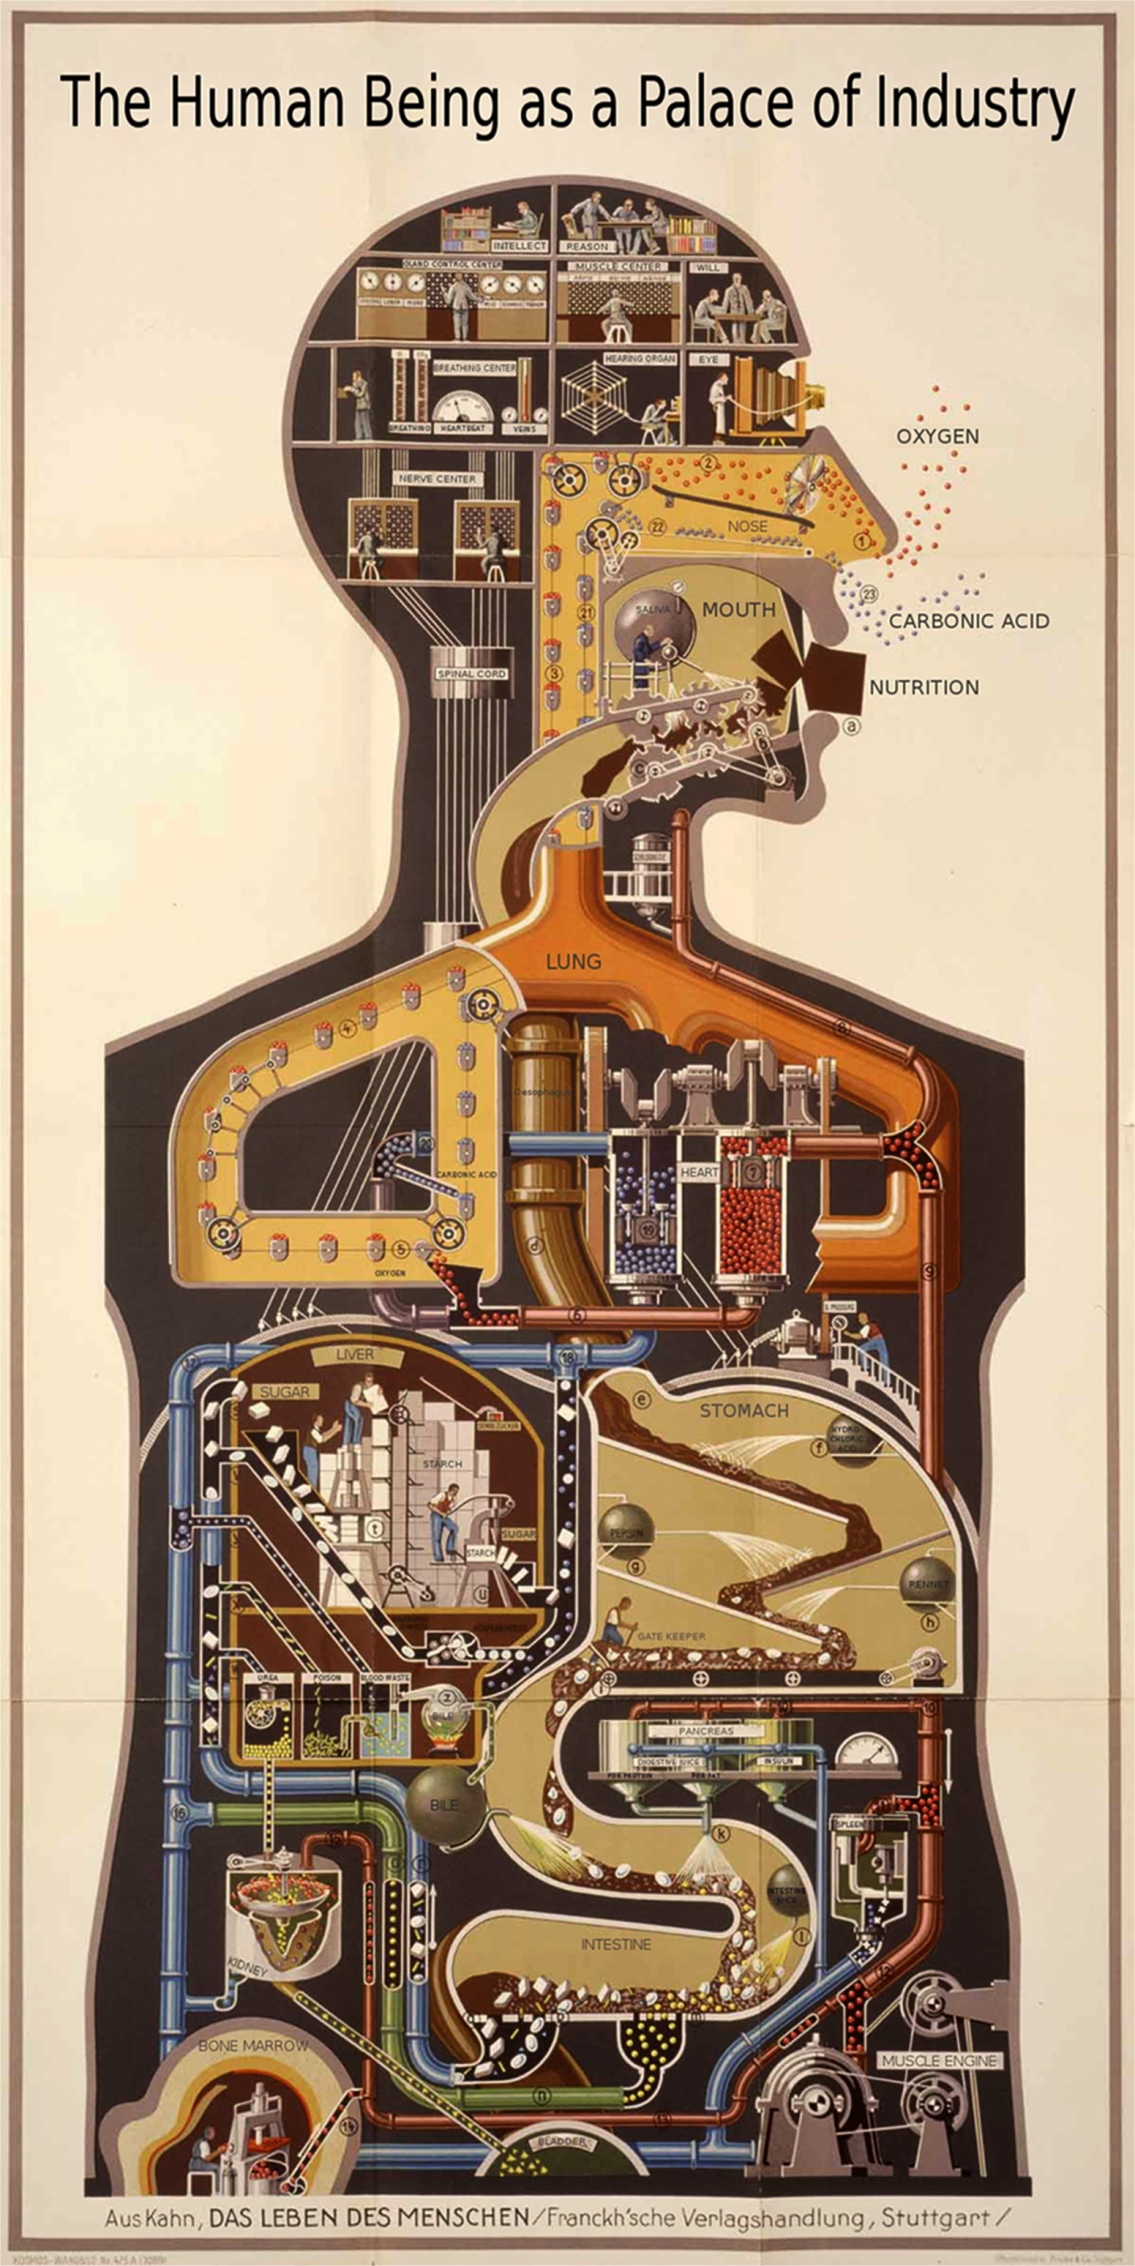 Man as Industrial Palace Vintage Infographic